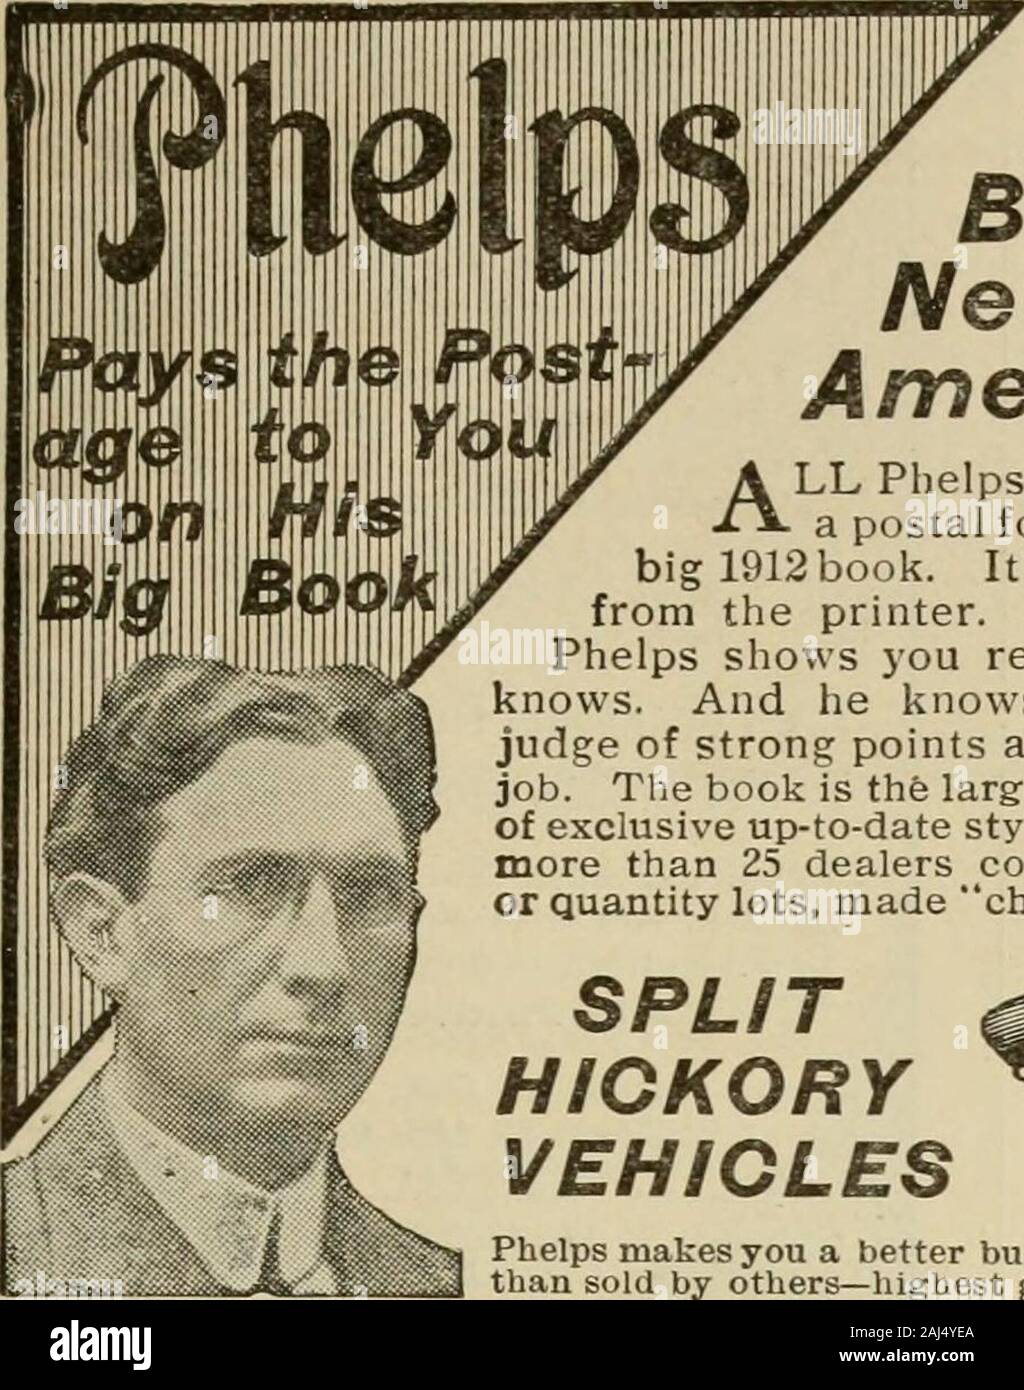 Gleanings in bee culture . Feb. 1, 1912. Save All Dealers Profits and Get the Biggest Selection of New Style Buggies In America Here ,^^^.^^.m^ LL Phelps asks of 5ou is to writea postal for jour copy of his ownbig 1912 book. Its waiting for you, freshfrom the printer. He pays the postage.Phelps shows you real buggy values. Heknows. And he knows how to make you ajudge of strong points and weak spots on anyjob. The book is the largest and best showroomof exclusive up-to-date styles in America. Showsmore than 25 dealers could—but no job lots,or quantity lots, made cheap to seU cheap. Stock Photo